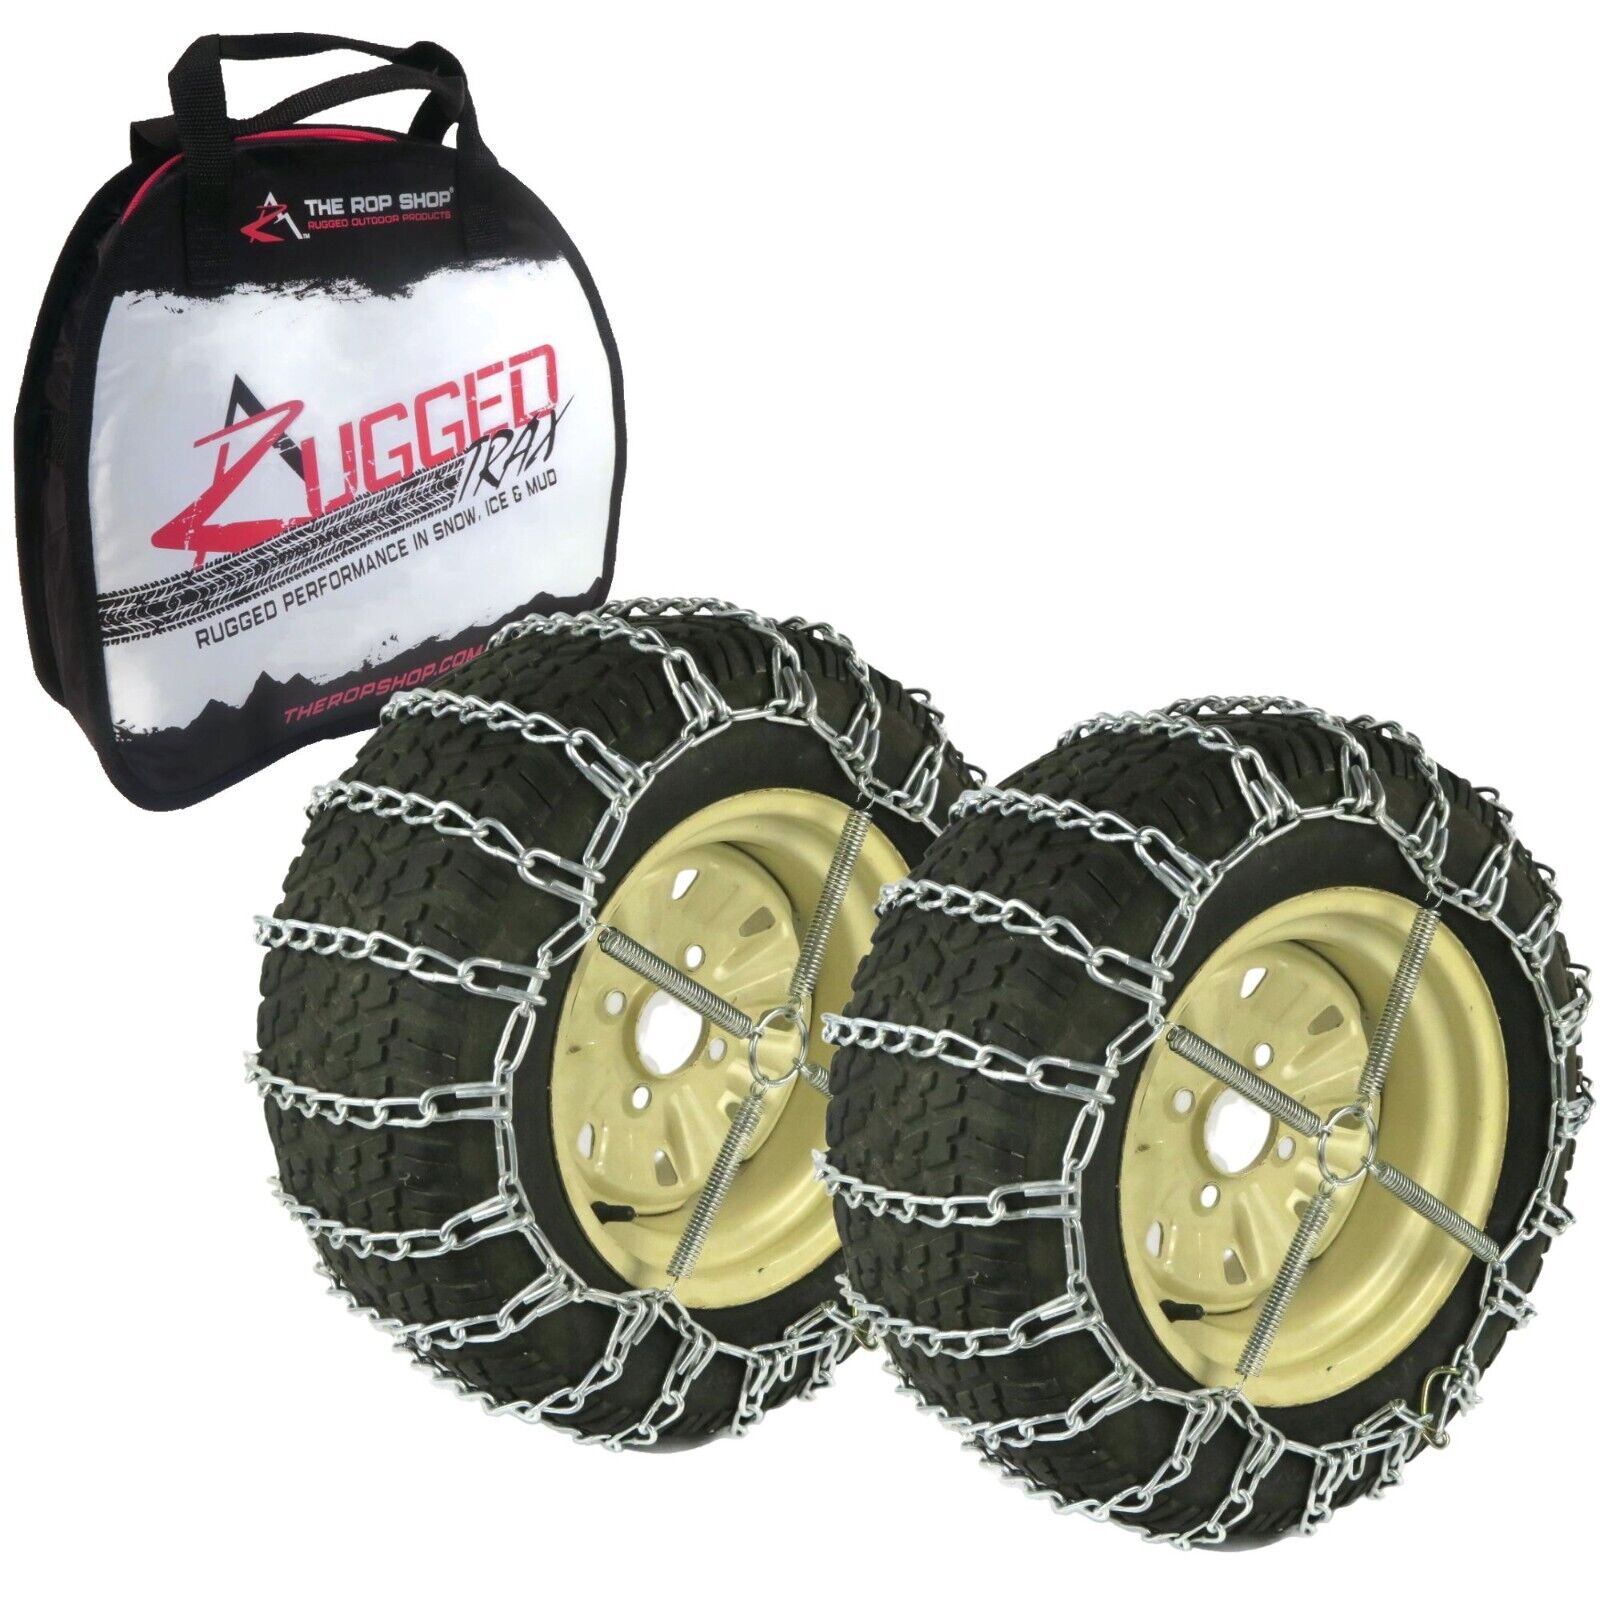 The ROP Shop | 2 Link Tire Chain & Tensioners Pair for Arctic Cat HDX with 26x12x12, 25x10x8 - image 1 of 9